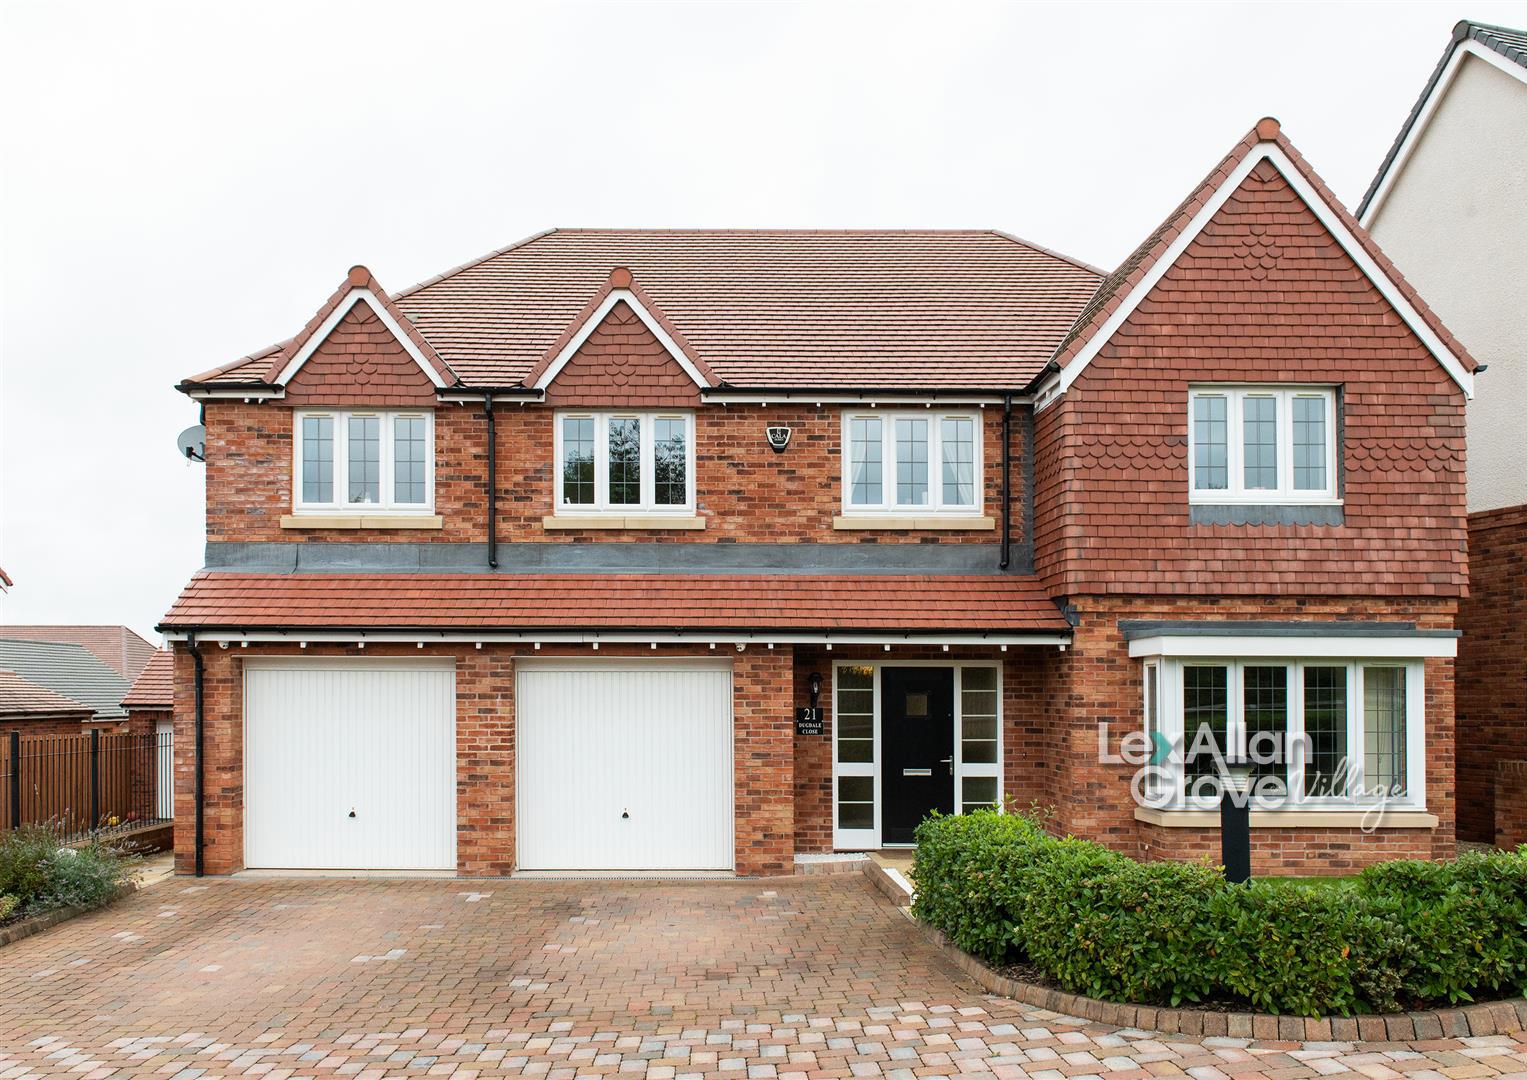 6 bed detached house for sale in Dugdale Close, Hagley - Property Image 1